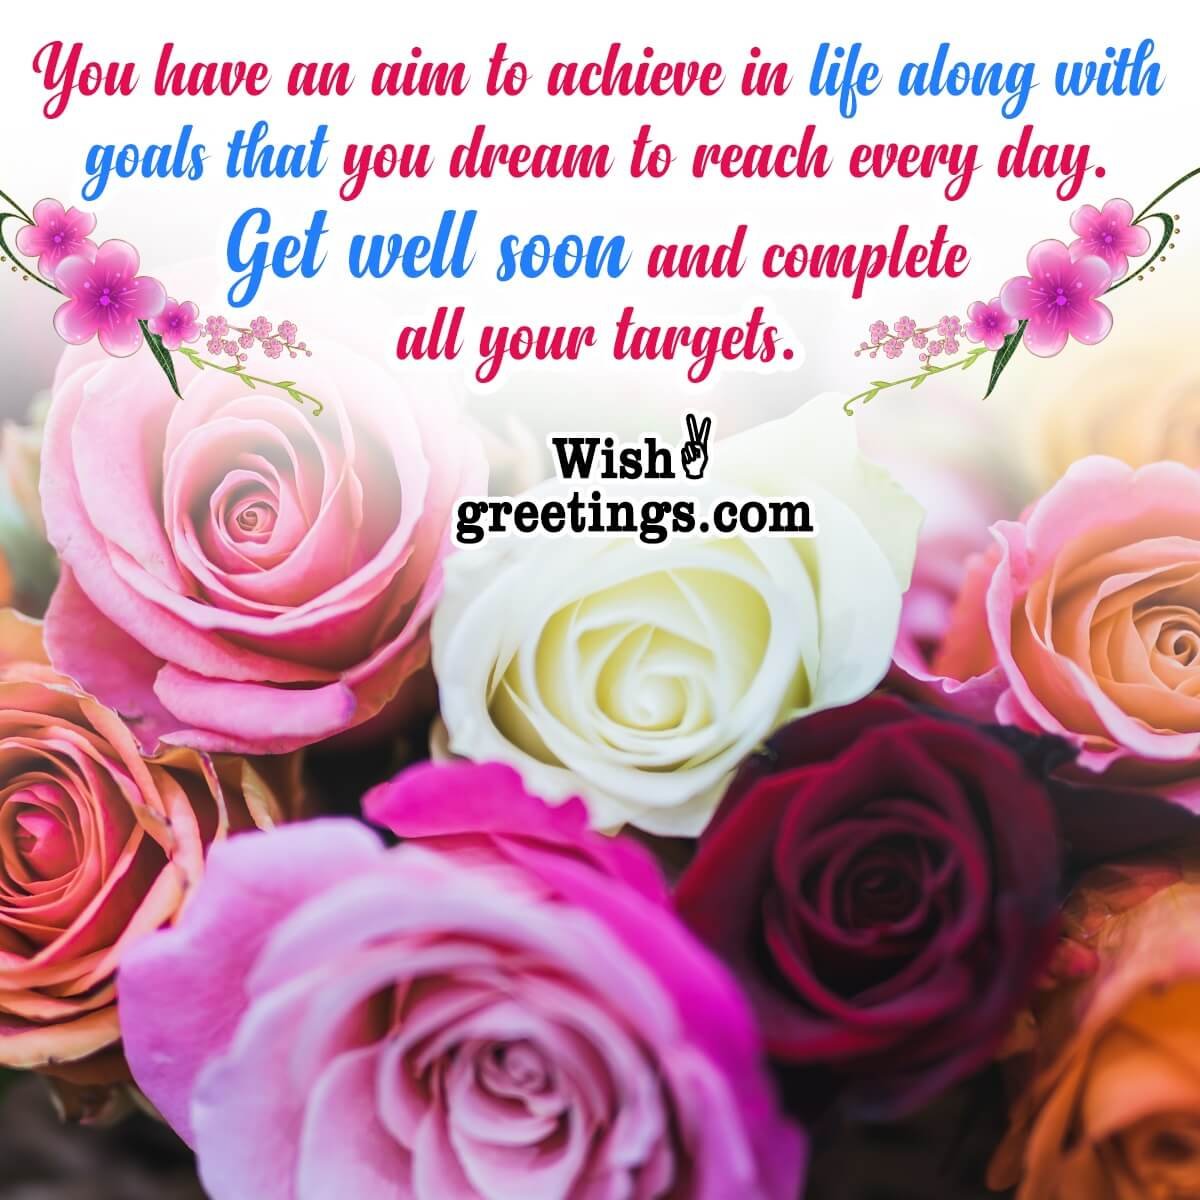 get-well-soon-card-messages-wish-greetings